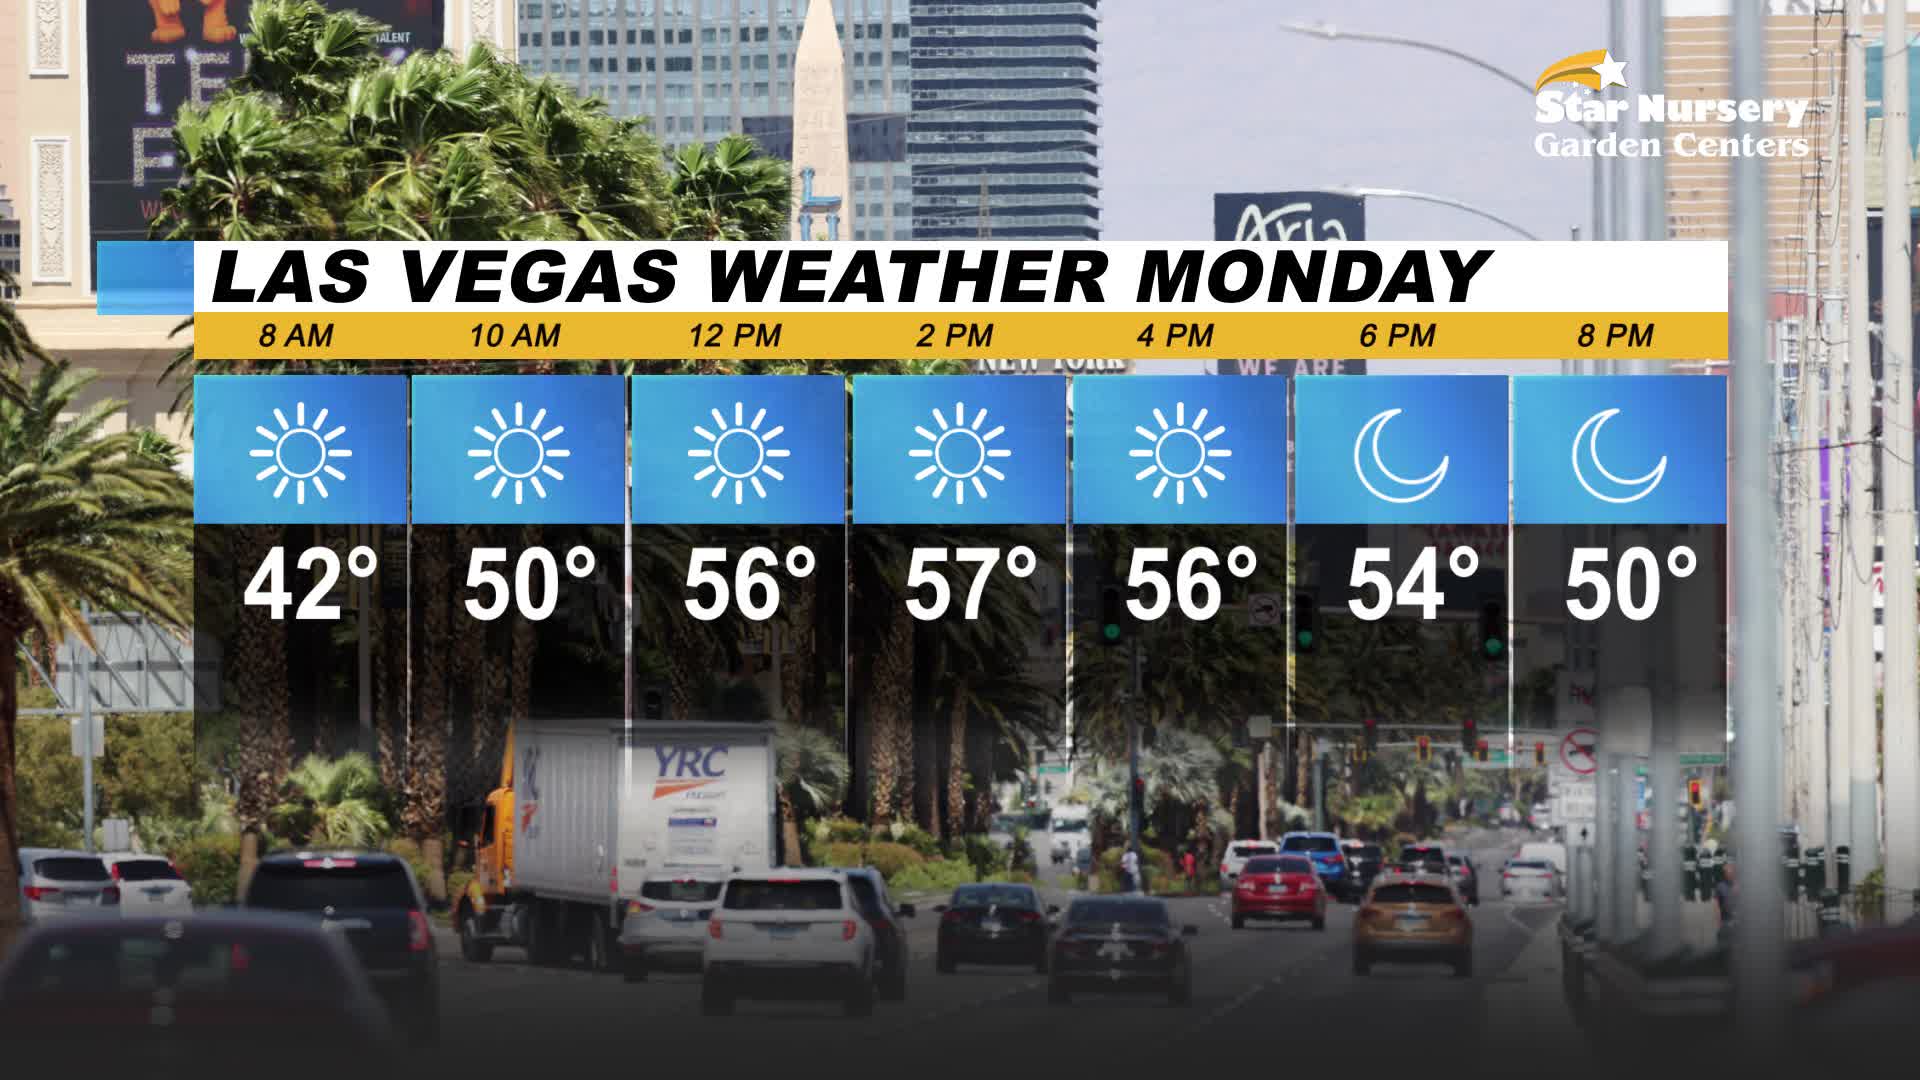 Sunny and breezy for Monday